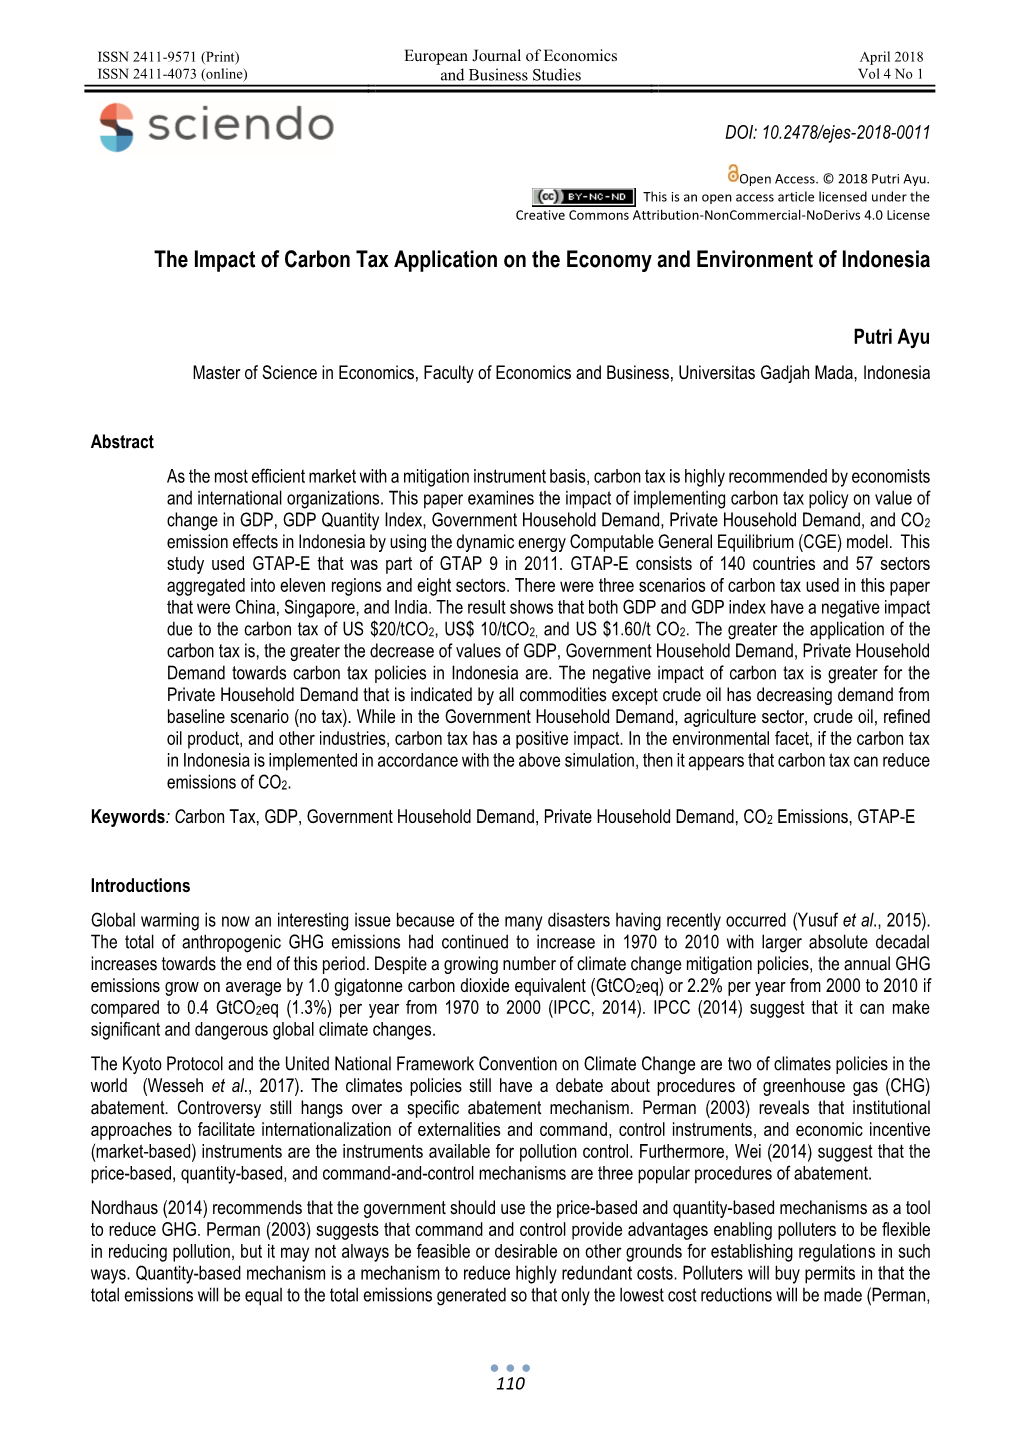 The Impact of Carbon Tax Application on the Economy and Environment of Indonesia